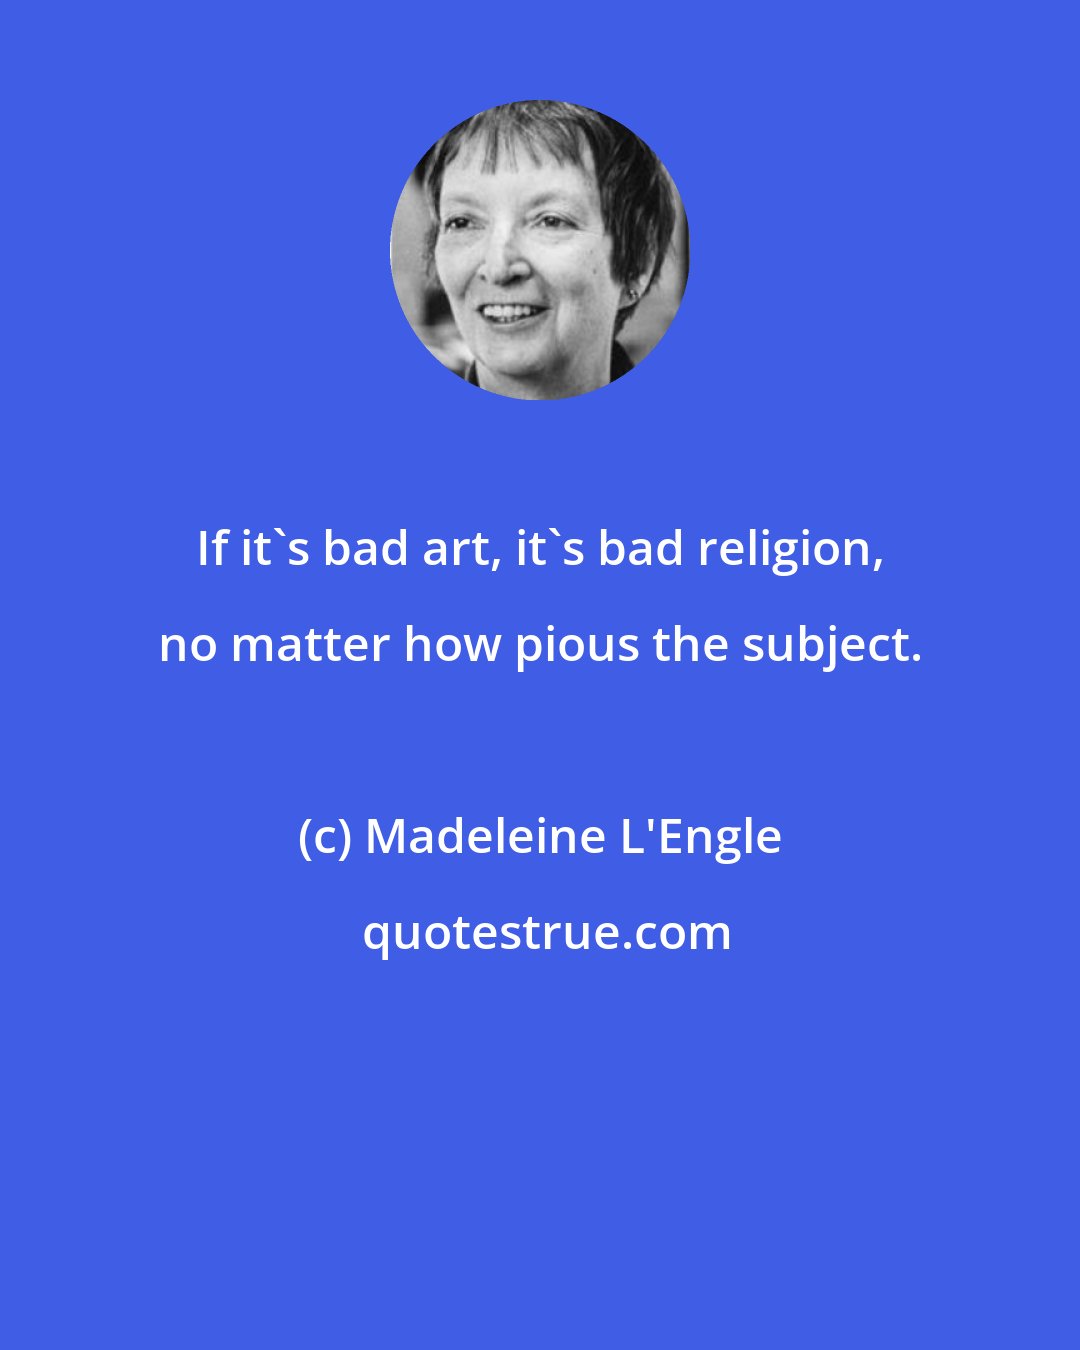 Madeleine L'Engle: If it's bad art, it's bad religion, no matter how pious the subject.